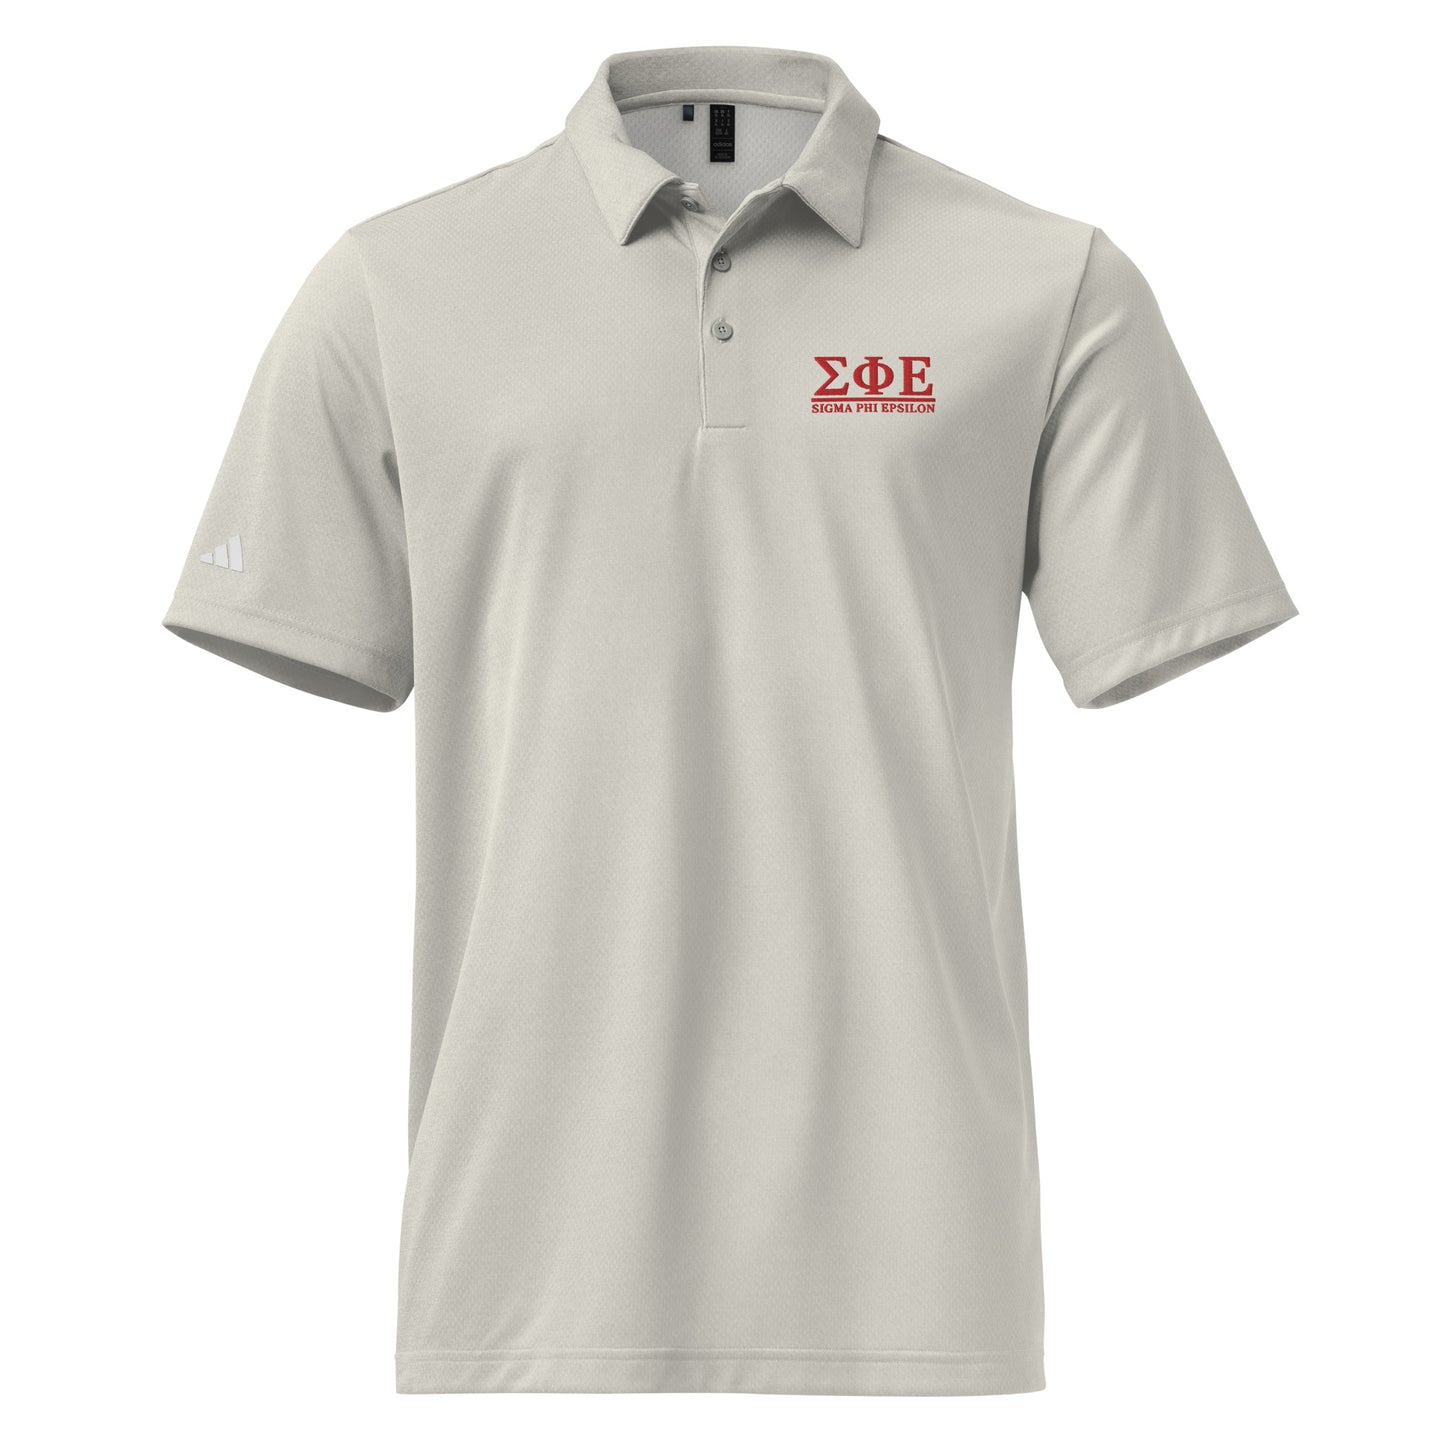 LIMITED RELEASE: SigEp Space-Dyed Polo by Adidas